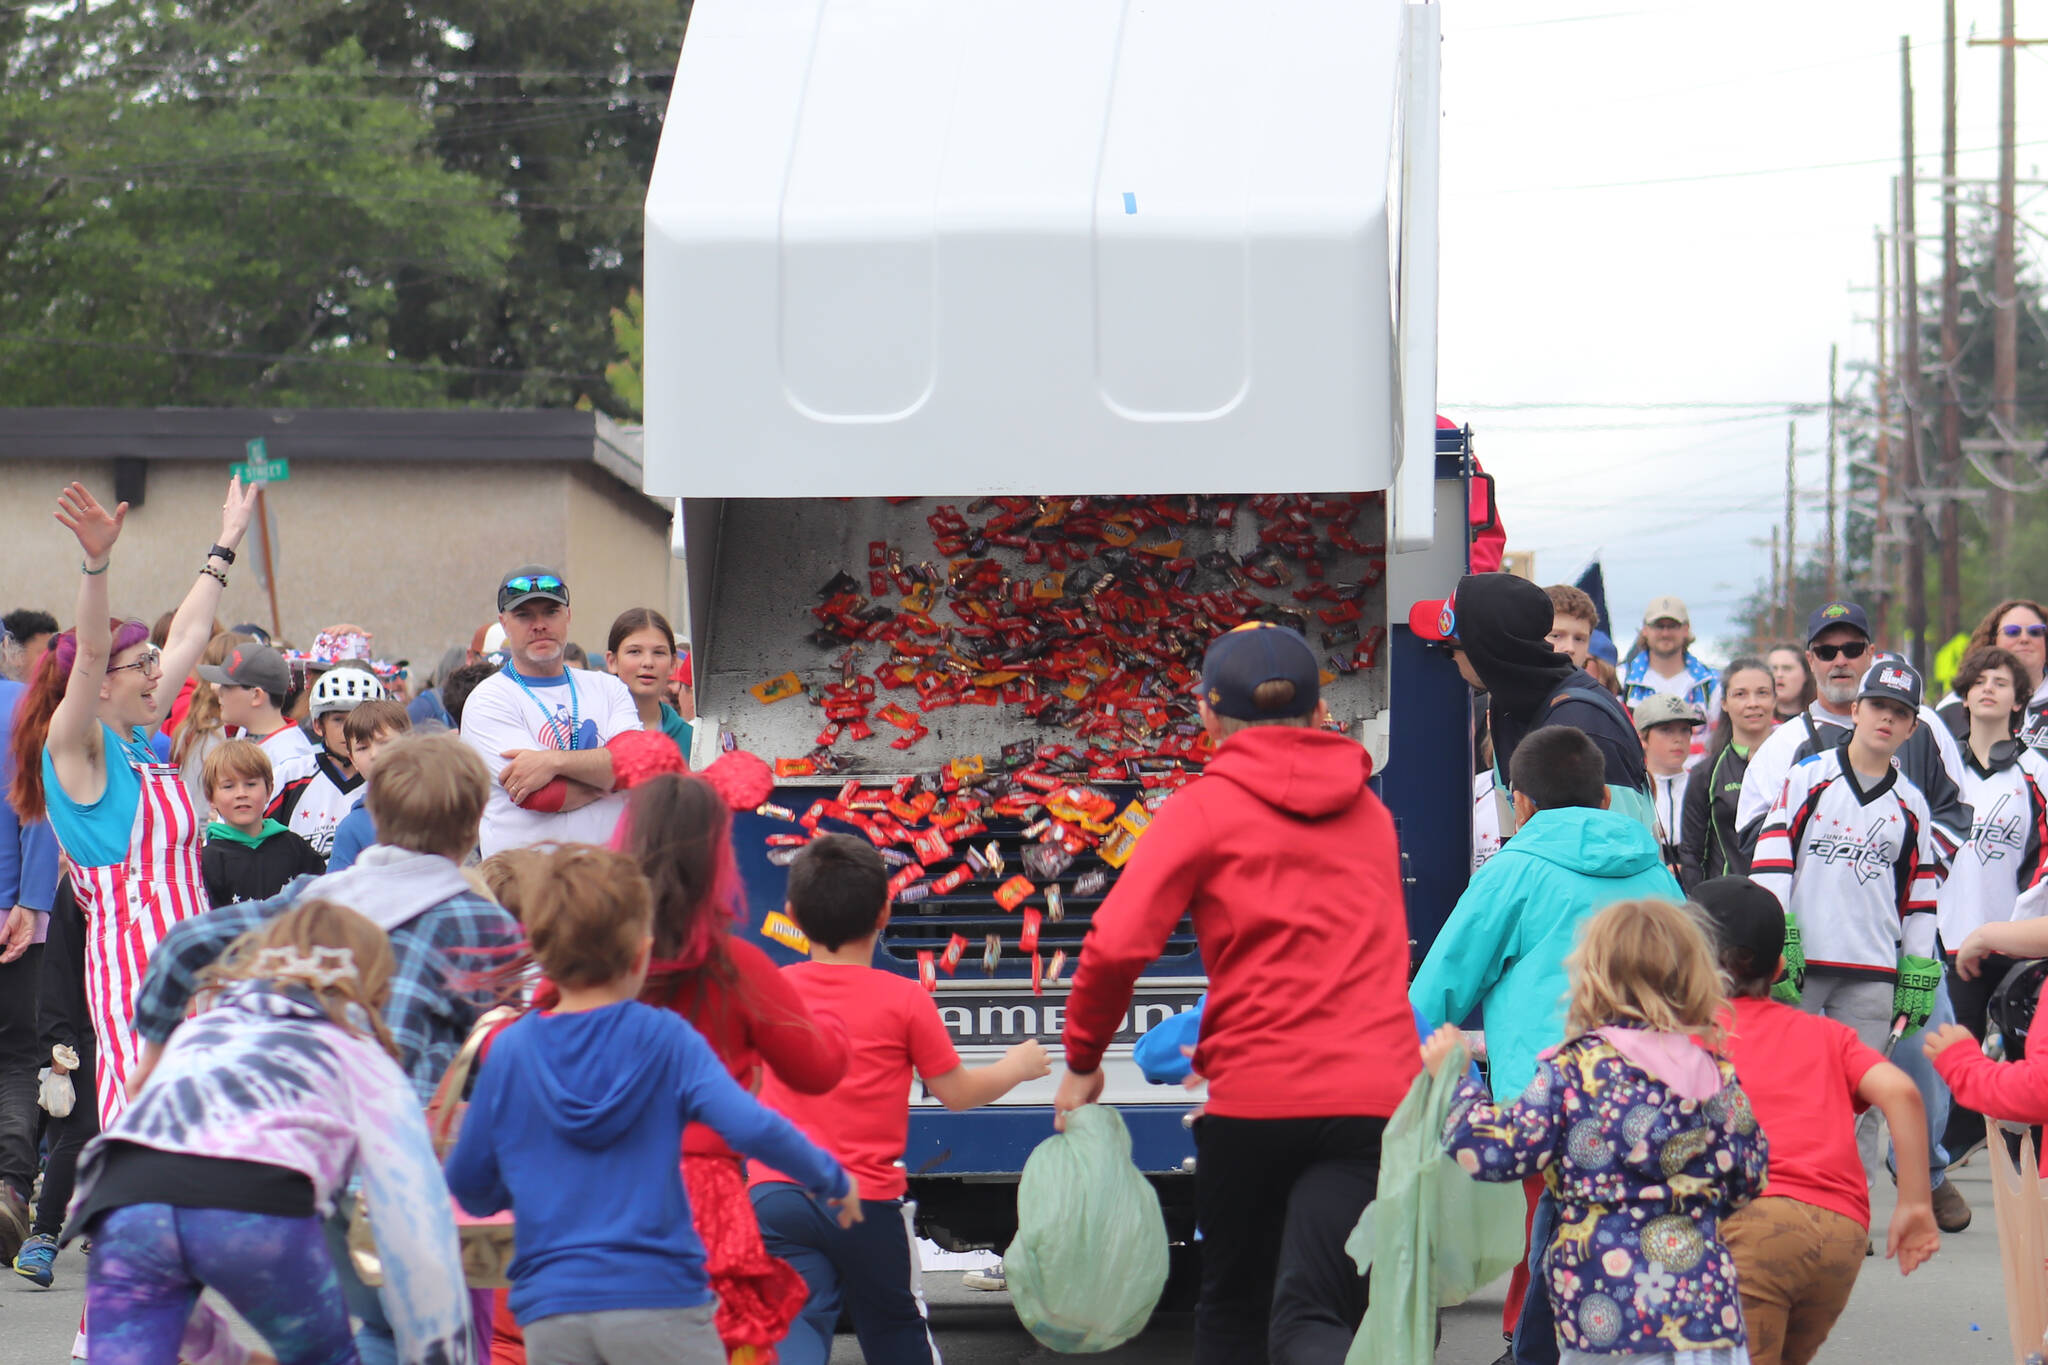 Children run as fast as they can toward Treadwell Arena’s zamboni as it fills the street with candy during the Fourth of July parade on Douglas. (Jasz Garrett / Juneau Empire)